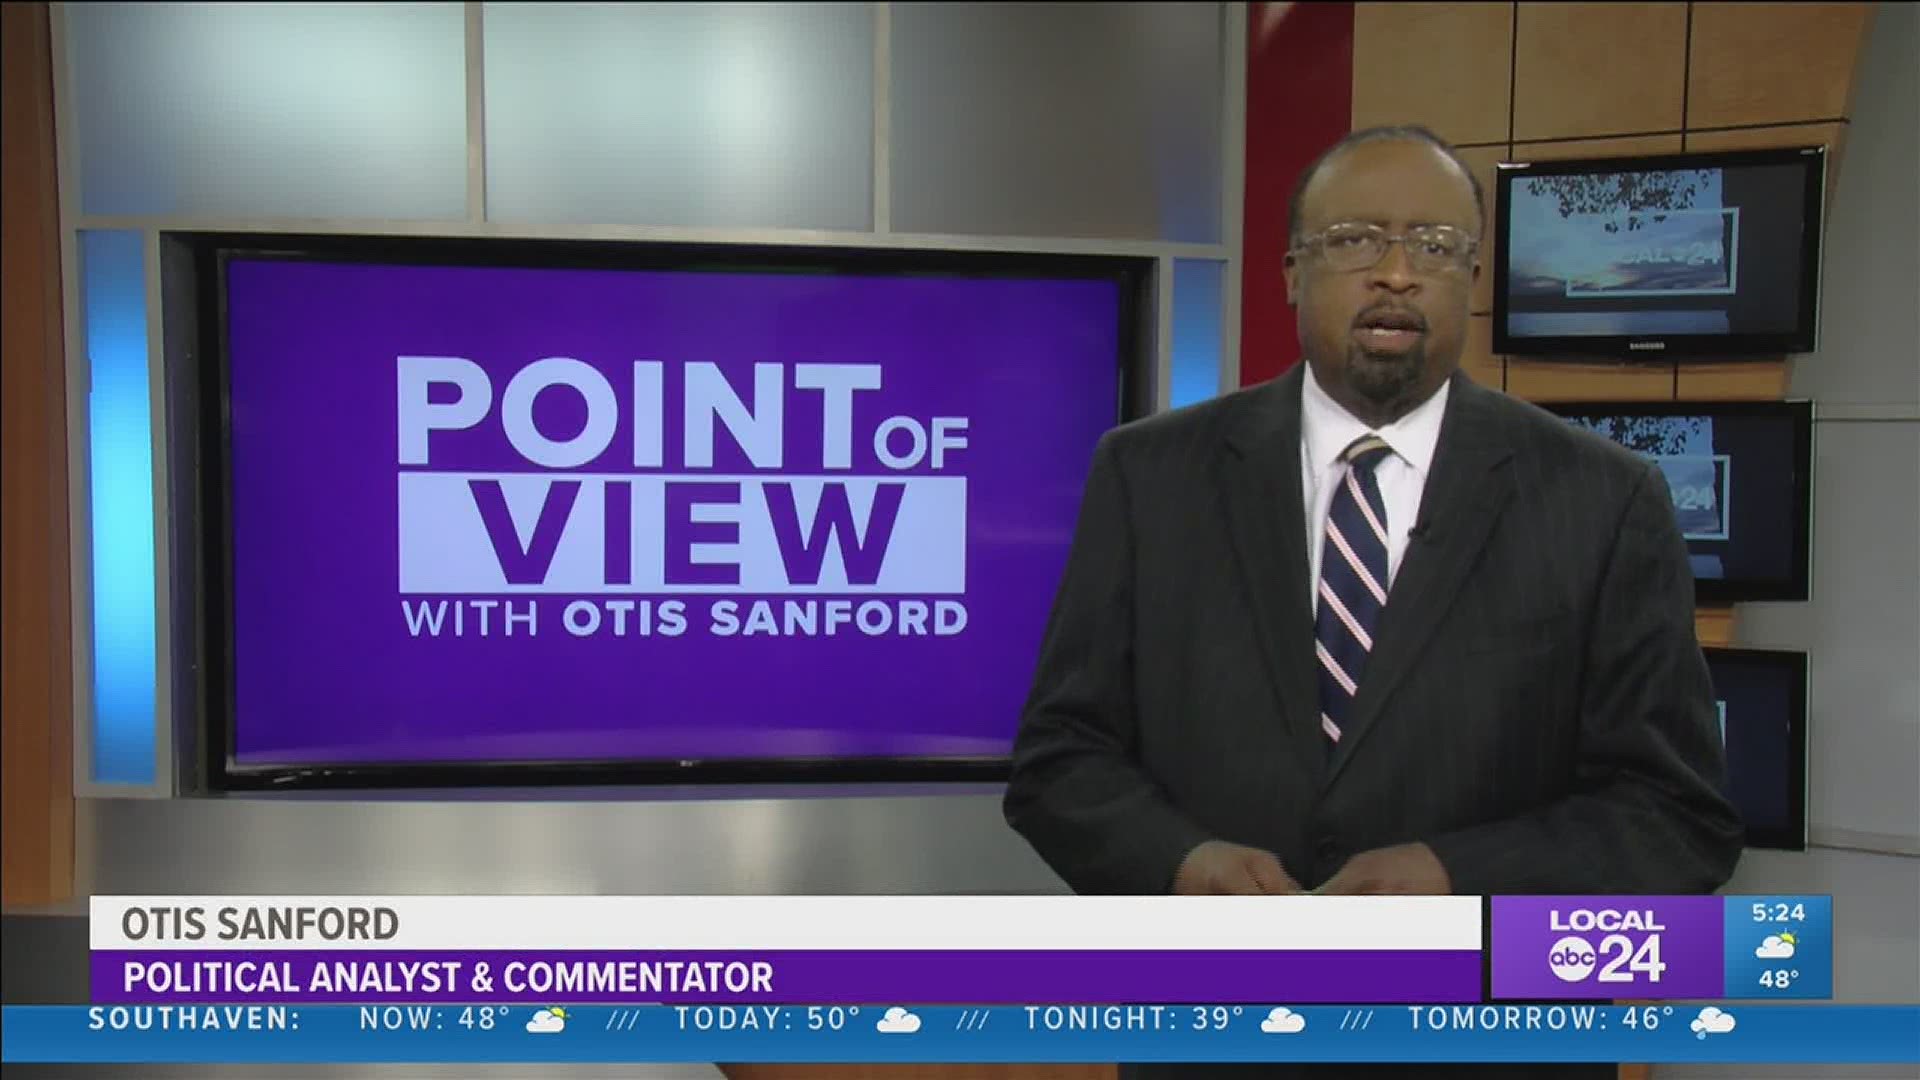 Local 24 News political analyst and commentator Otis Sanford shares his point of view on the mismanagement of COVID-19 vaccines in Shelby County.